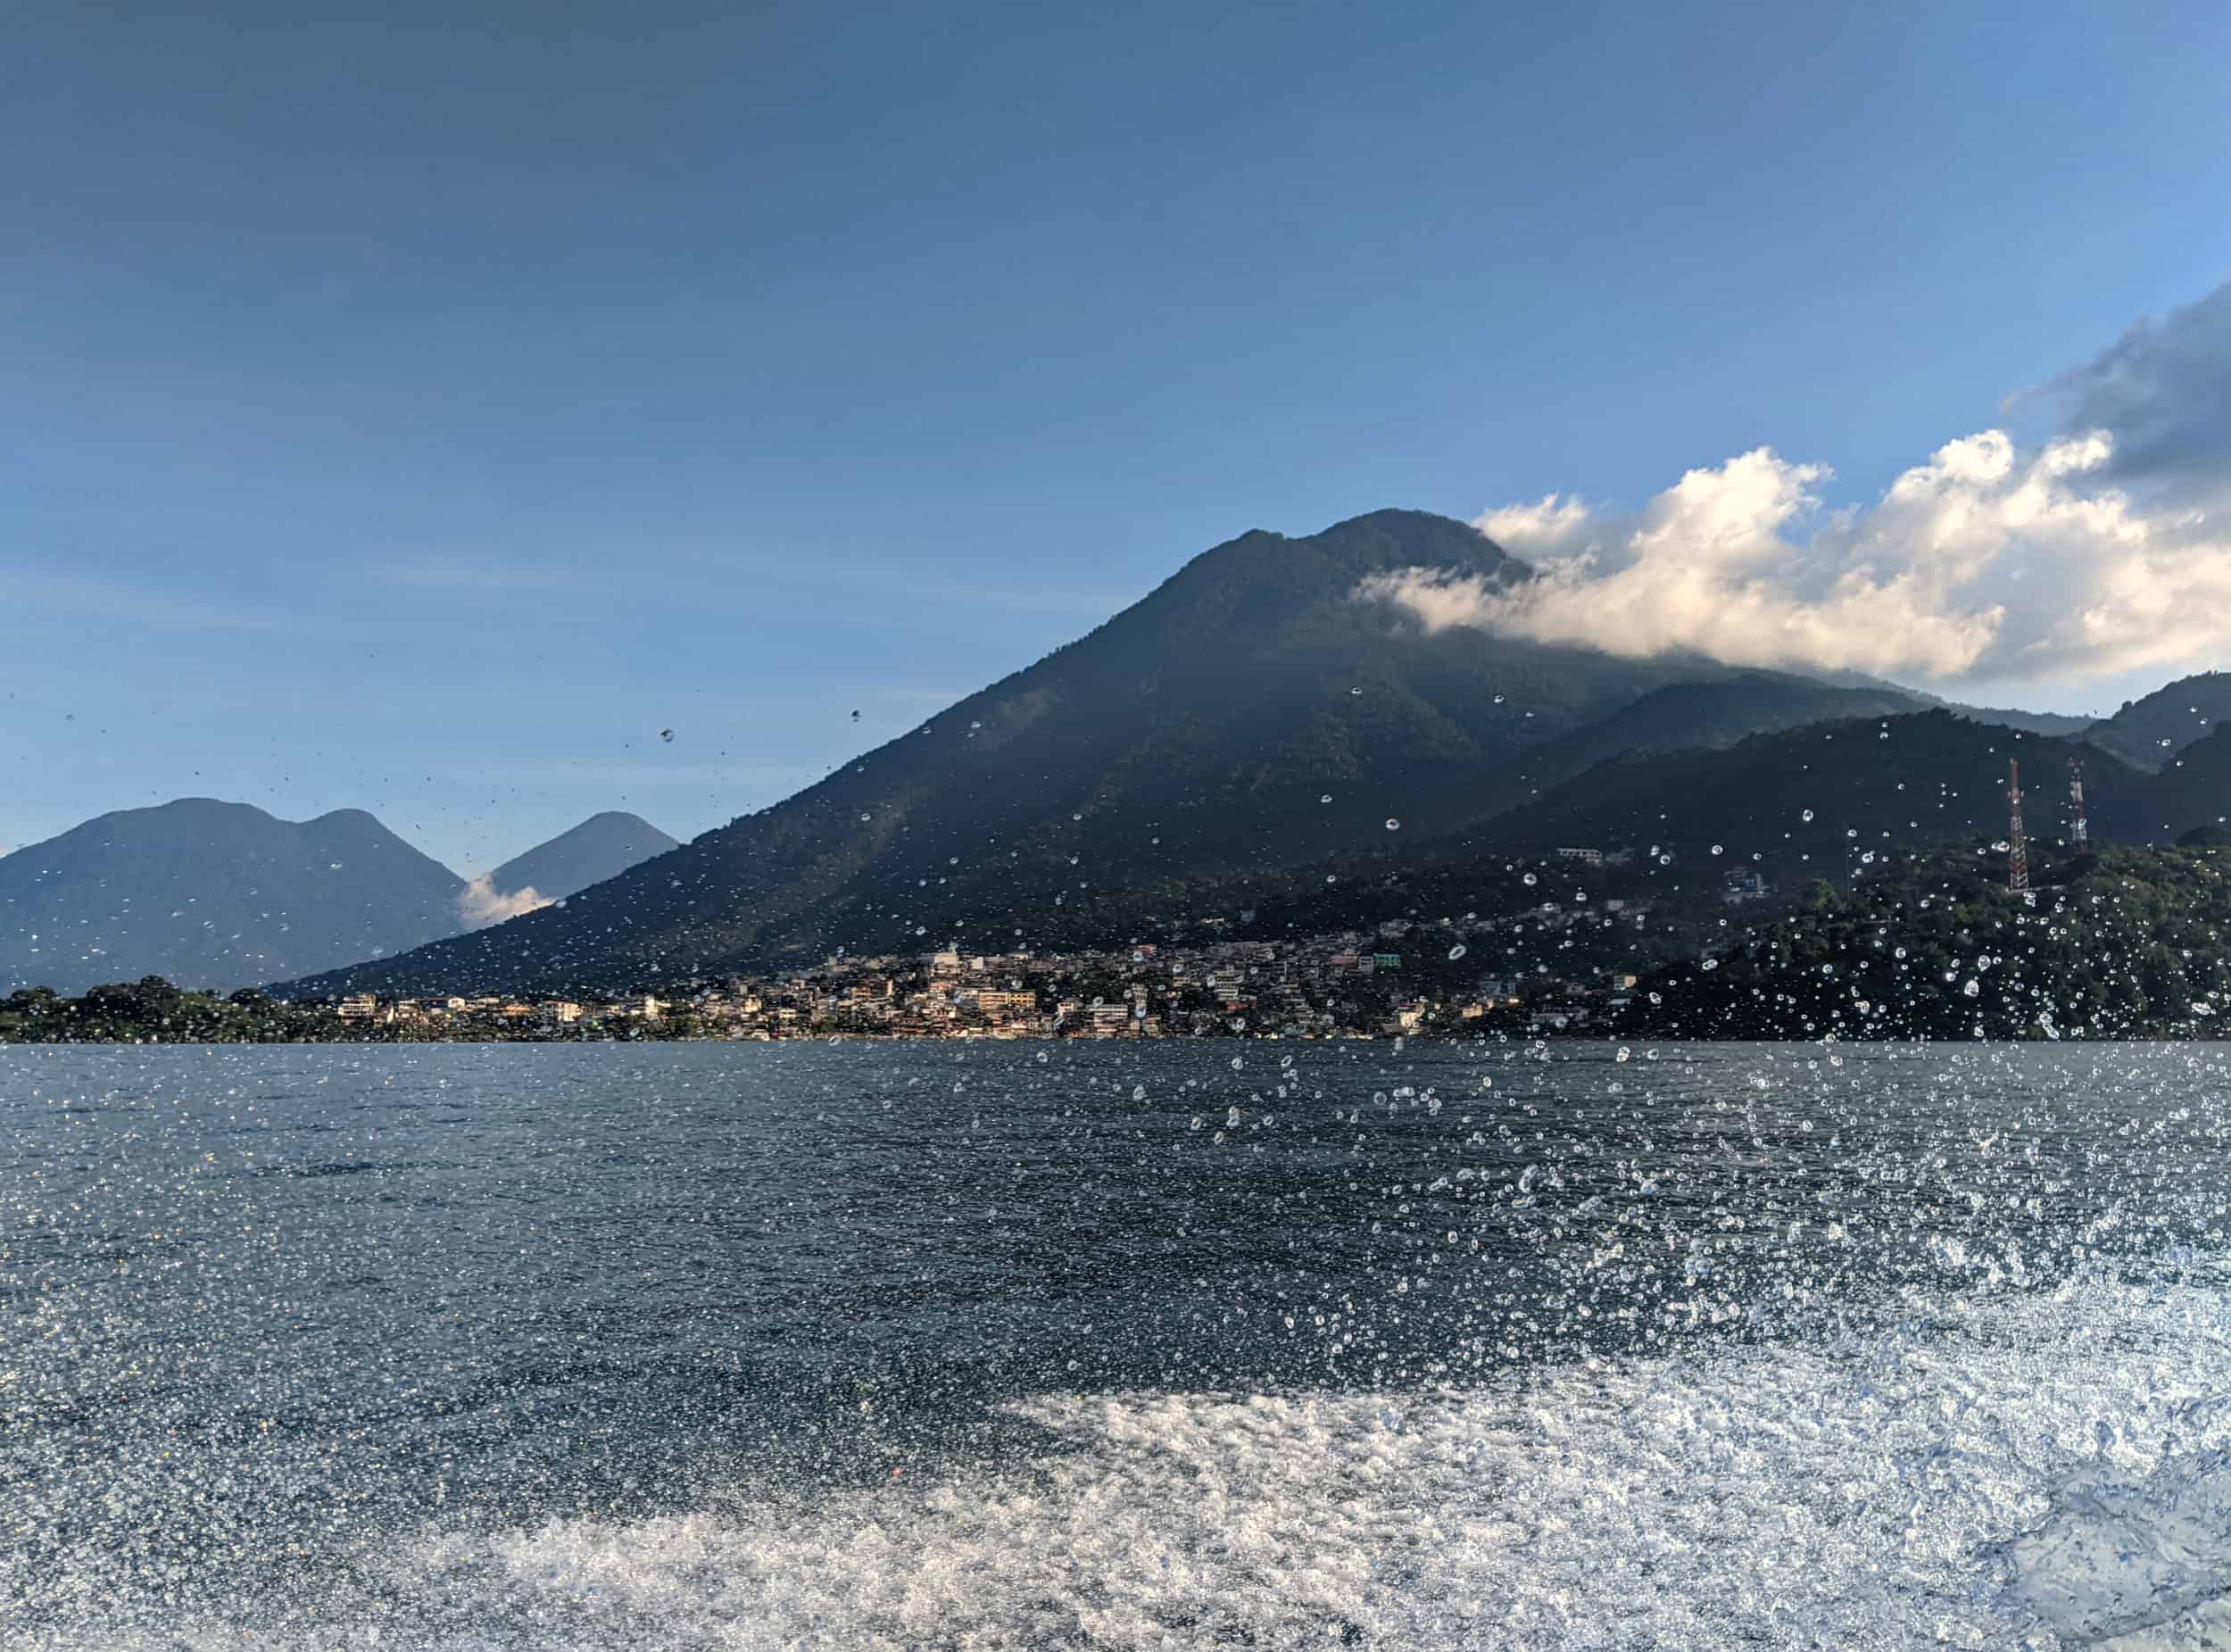 Volcan San Pedro from the boat